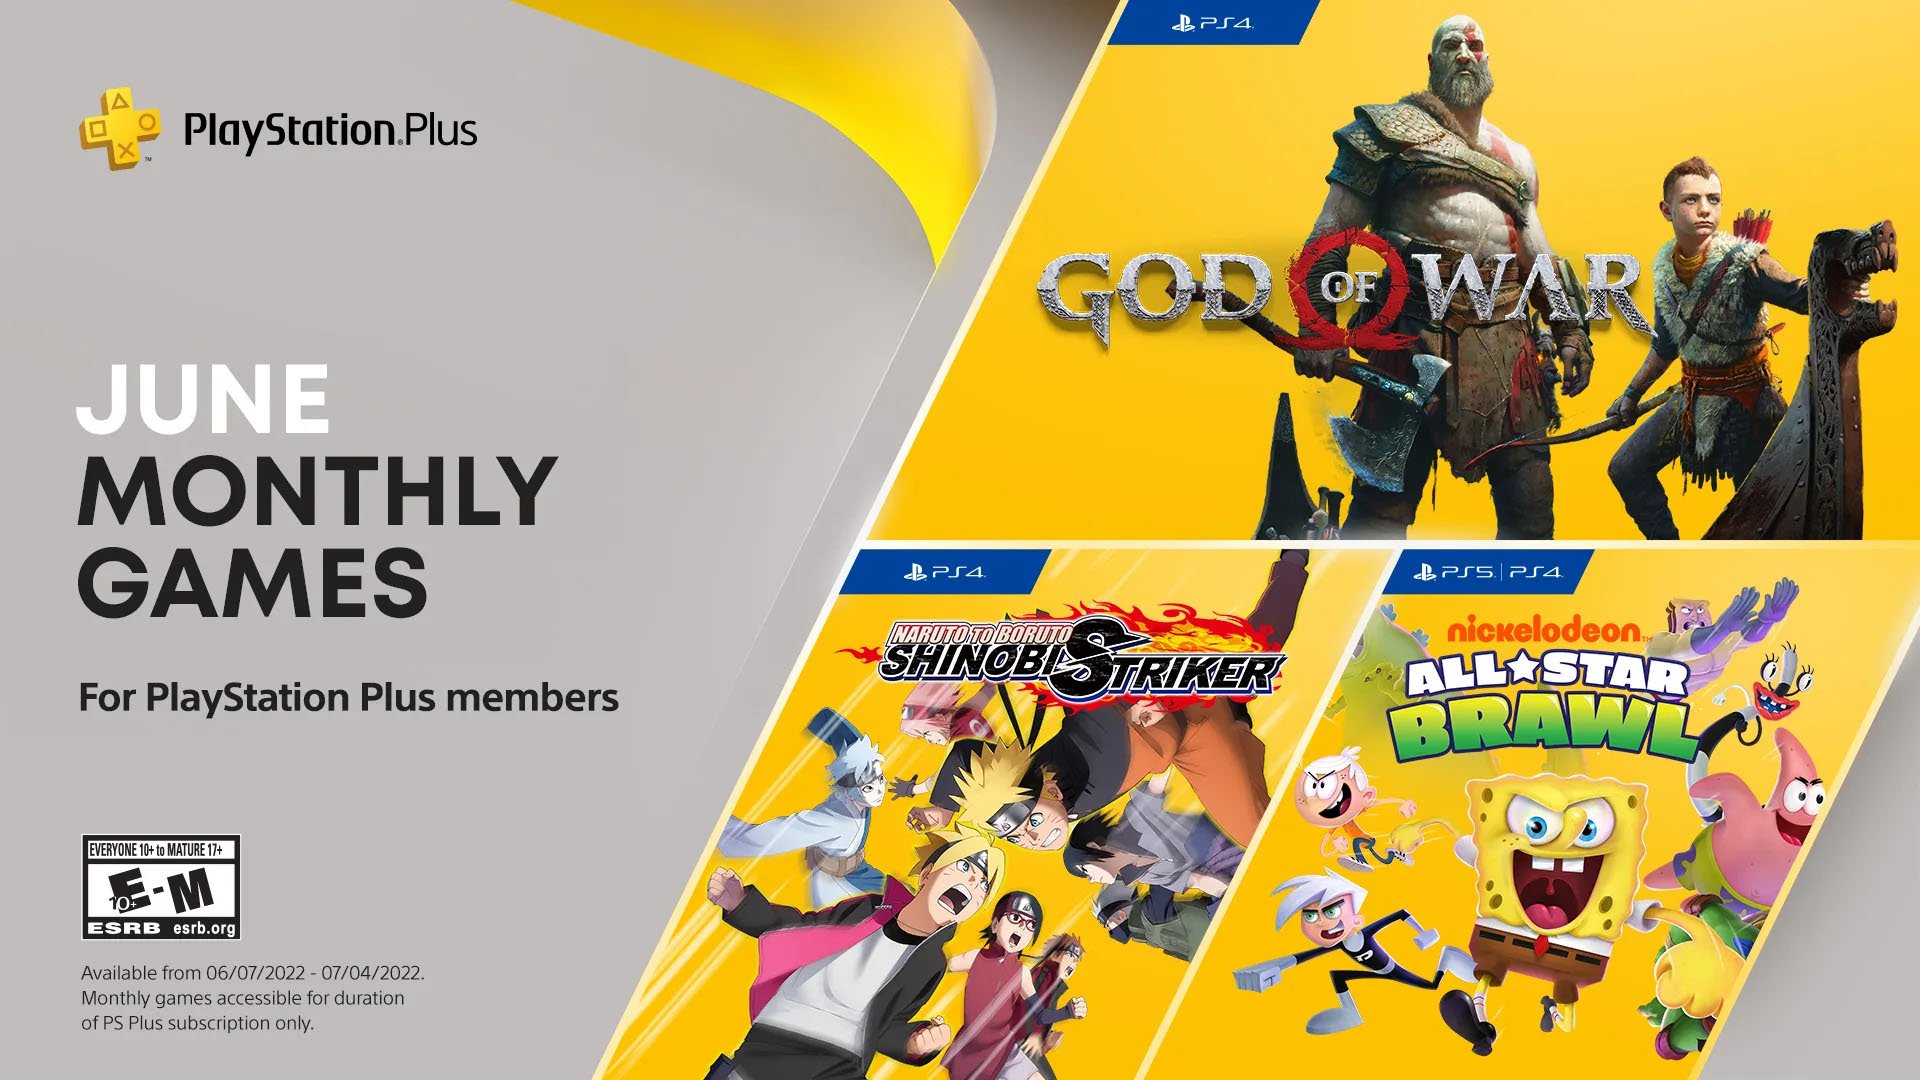 PlayStation Plus PS4, PS5 Free Games For March 2021 Announced